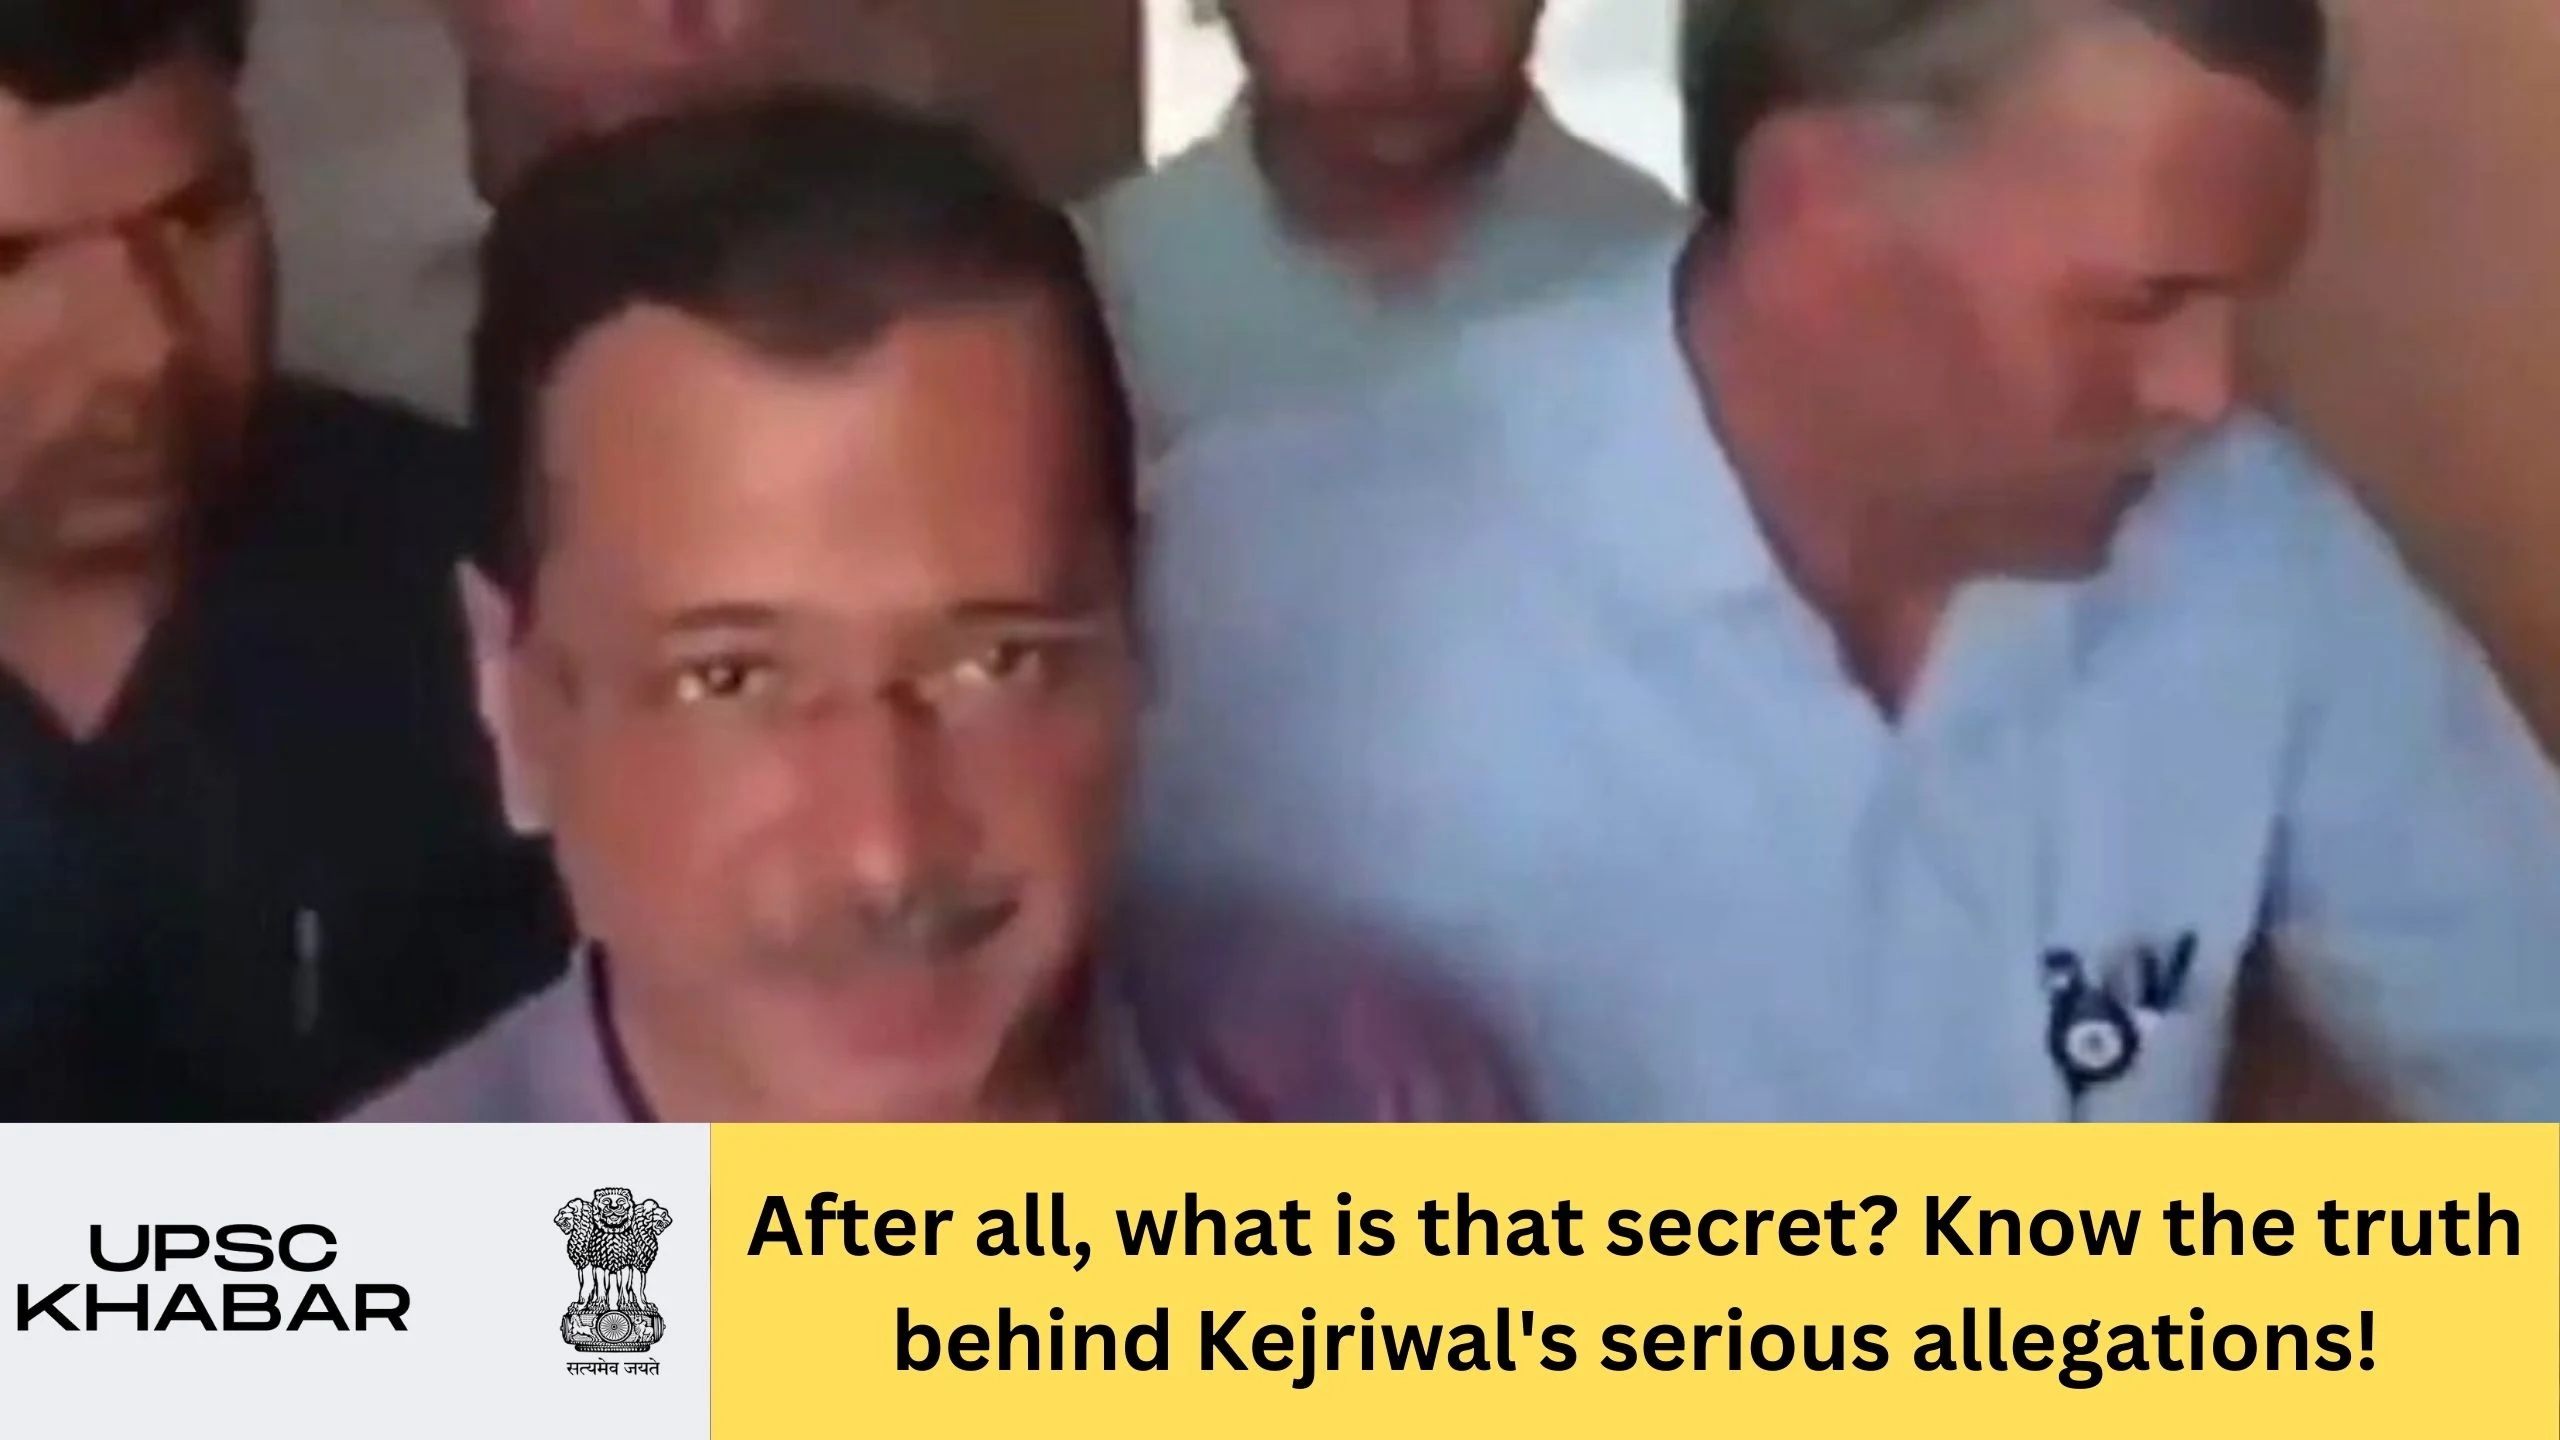 After all, what is that secret? Know the truth behind Kejriwal's serious allegations!